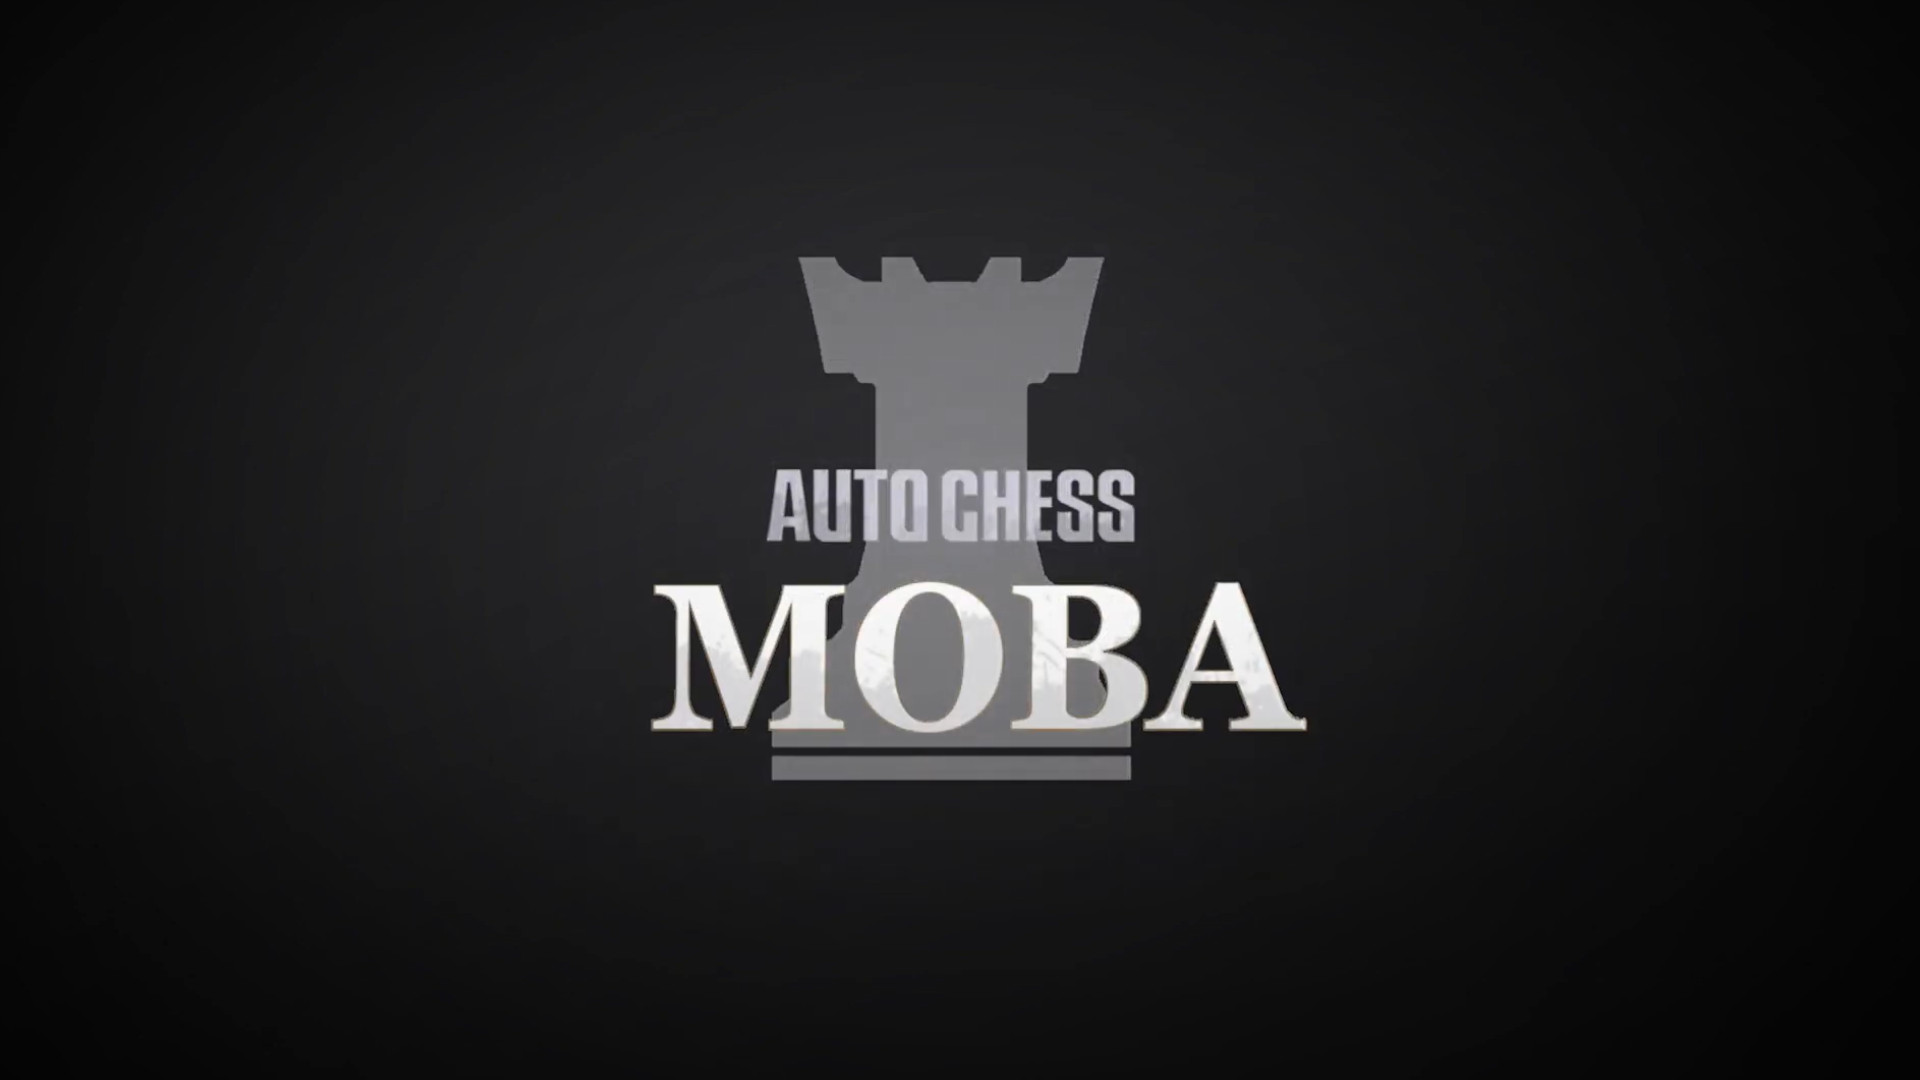 Auto Chess MOBA Developer Log  Hello everyone, welcome to the